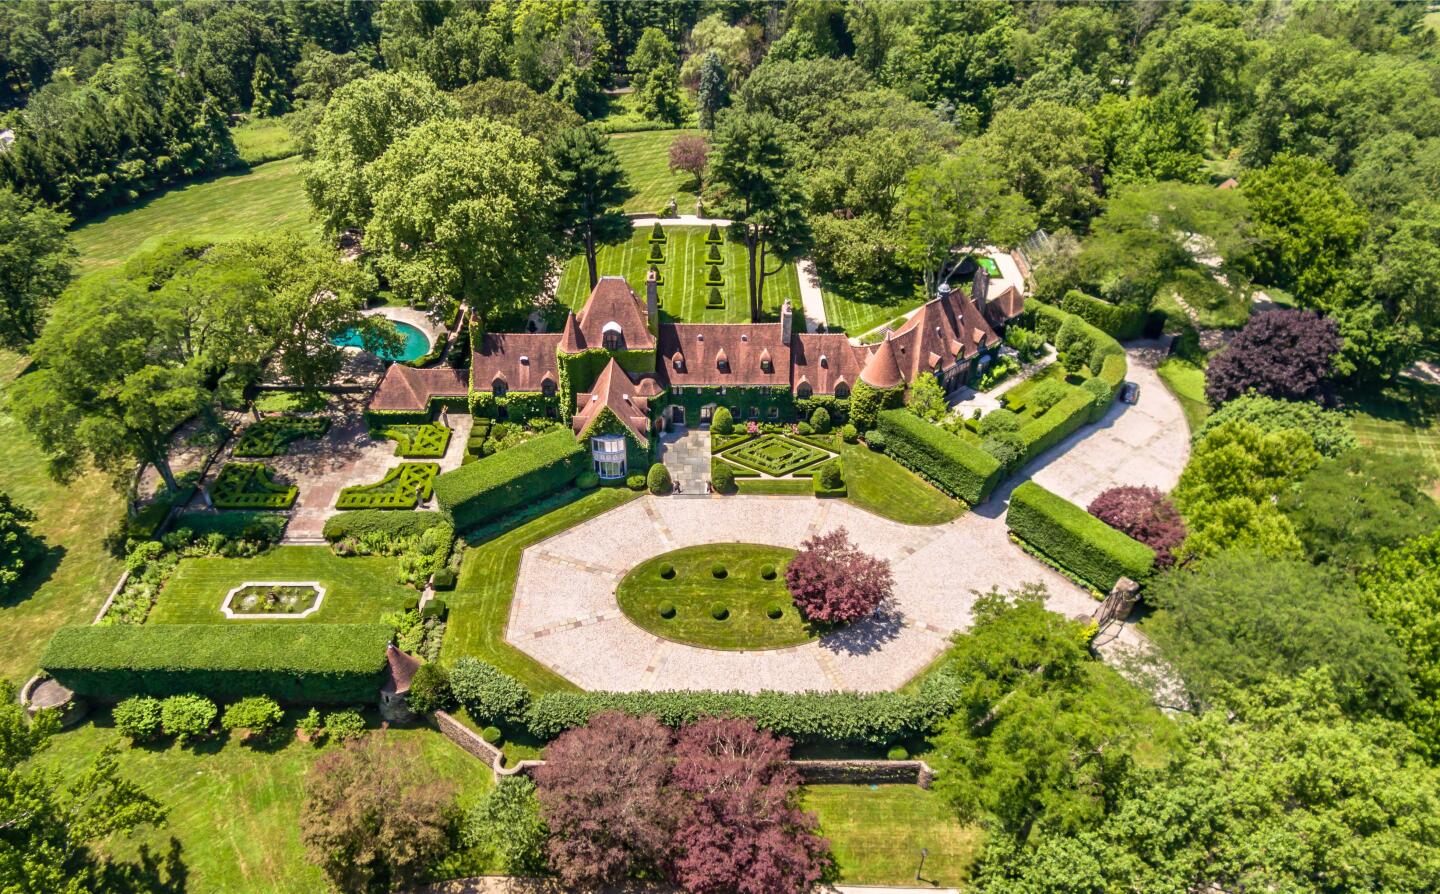 The park-like grounds center on a 13,000-square-foot mansion surrounded by rolling lawns, manicured hedges, water features and a tennis court.